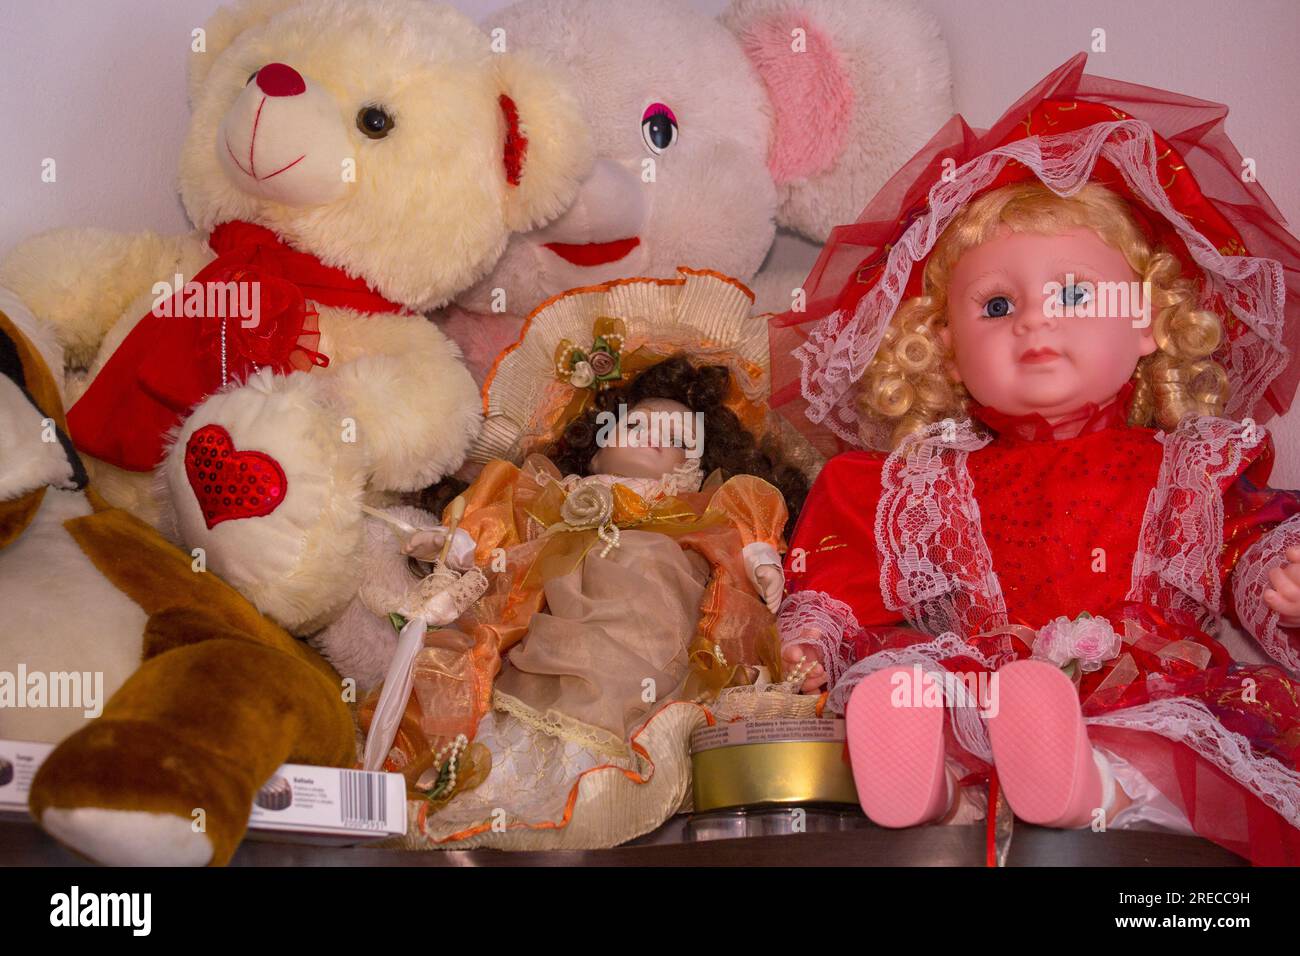 many dolls and soft bear on the pile Stock Photo